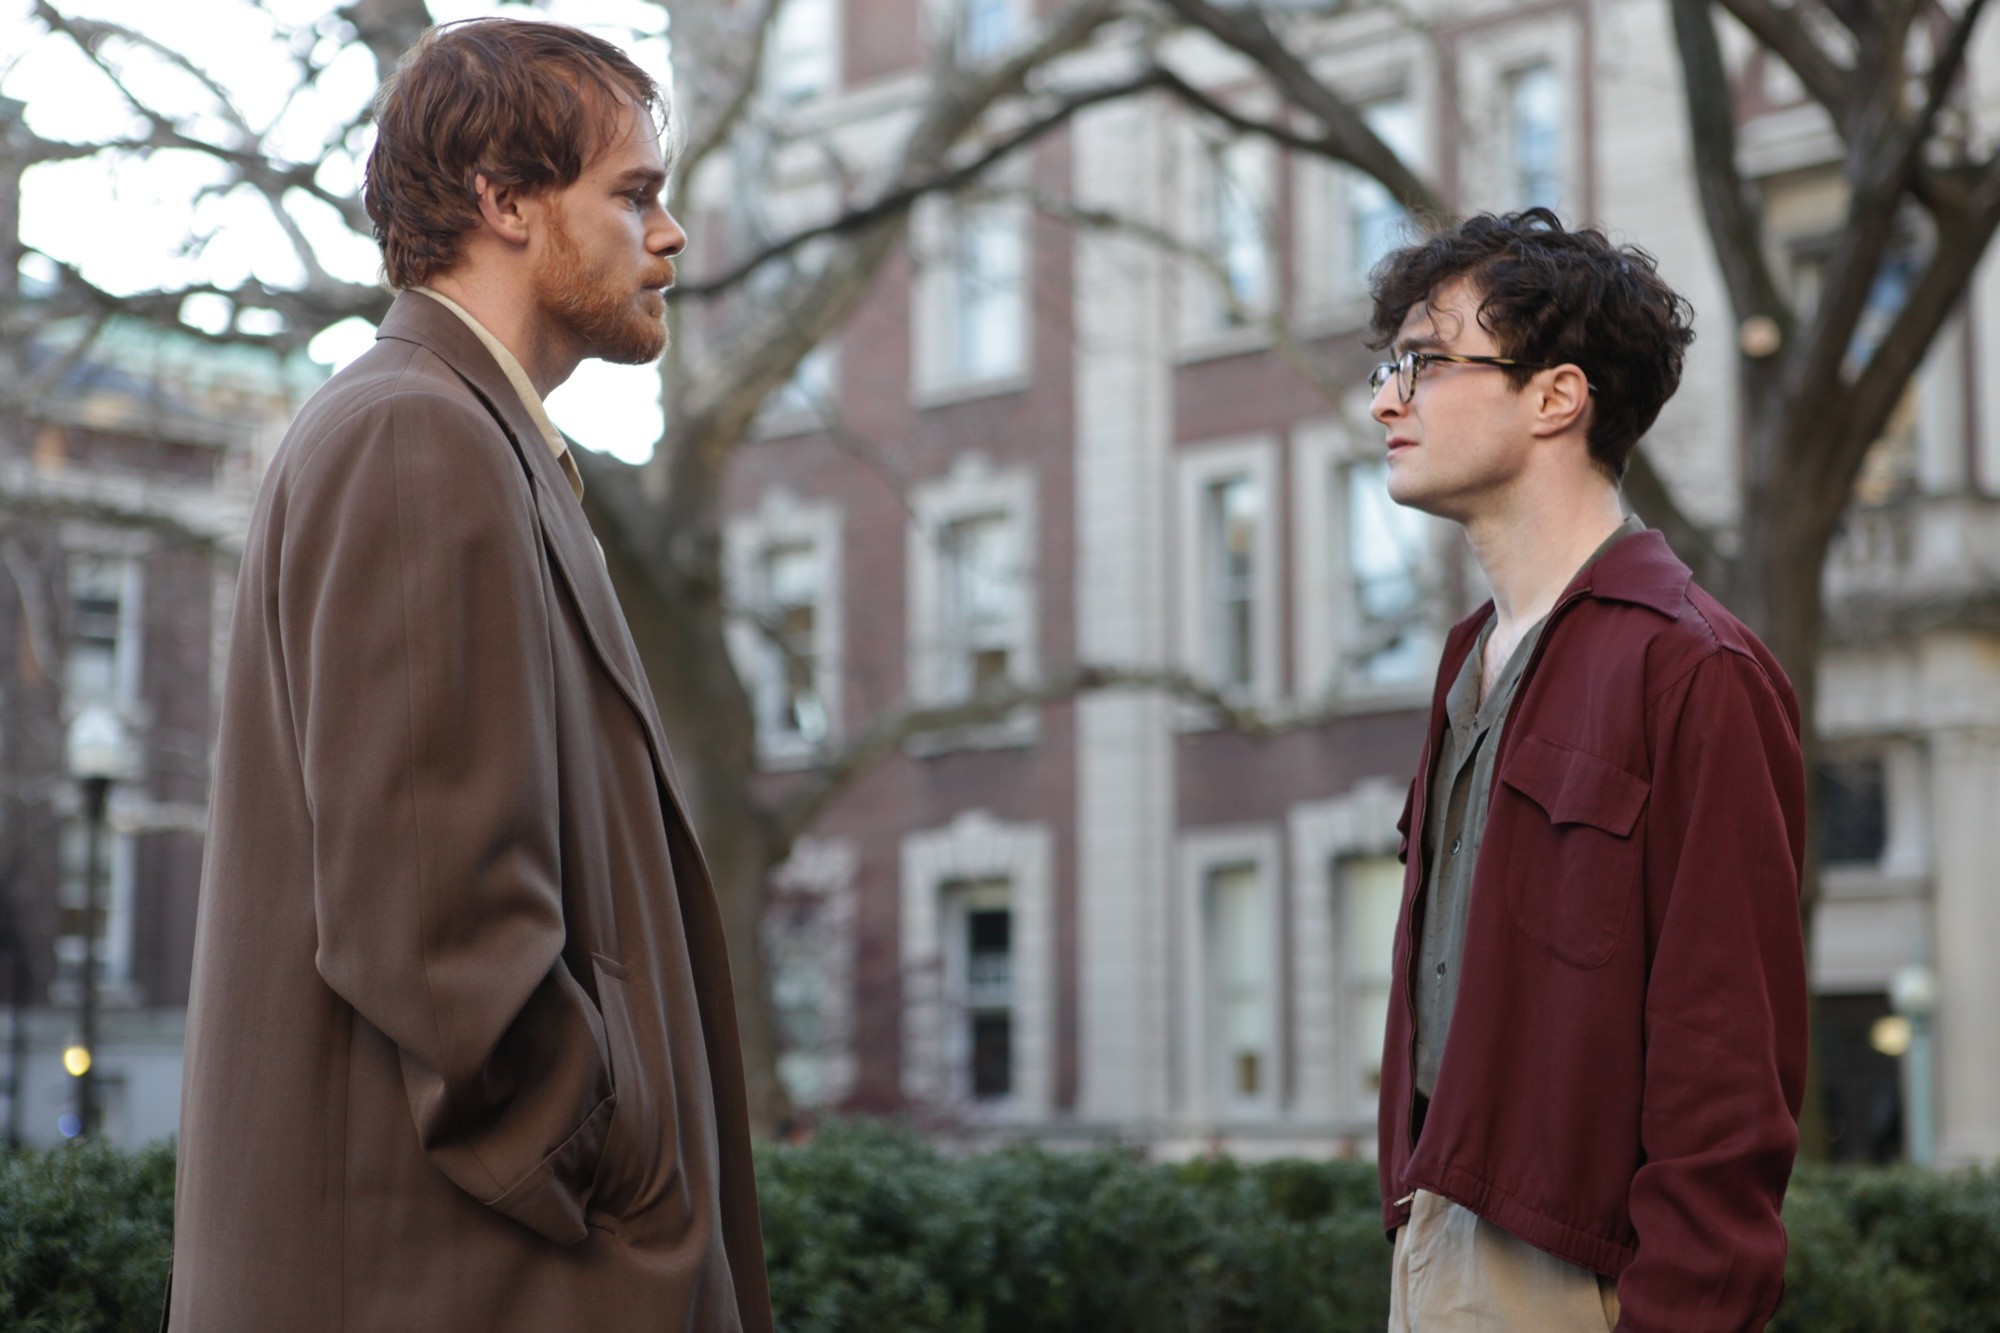 Michael C. Hall stars as David Kammerer and Daniel Radcliffe stars as Allen Ginsberg in Sony Pictures Classics' Kill Your Darlings (2013)